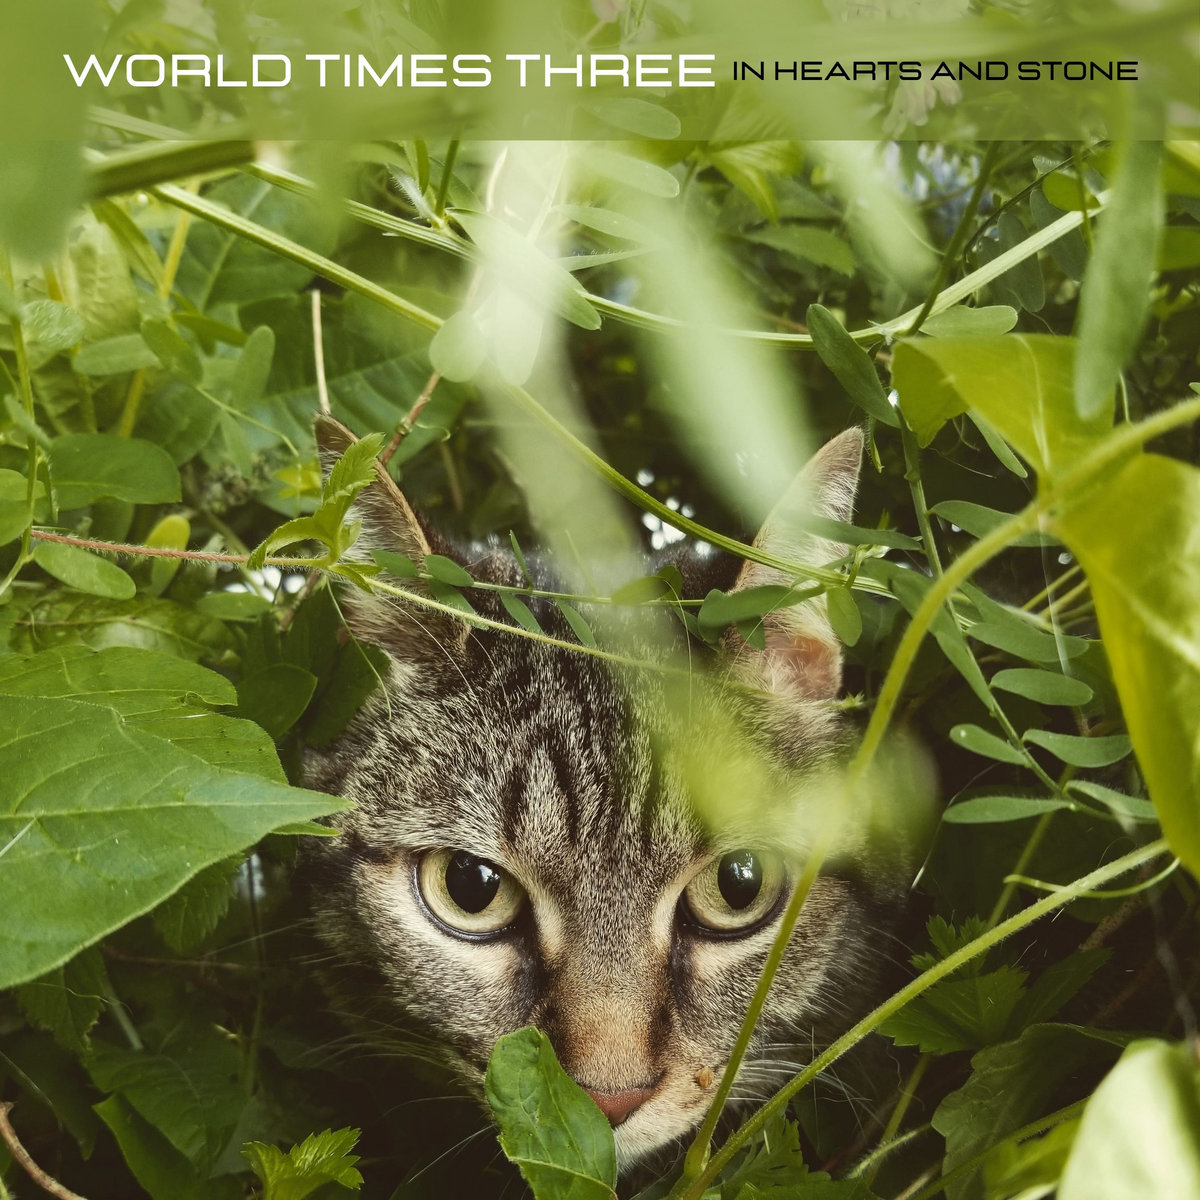 DEBUT ALBUM REVIEW: In Hearts and Stone by World Times Three